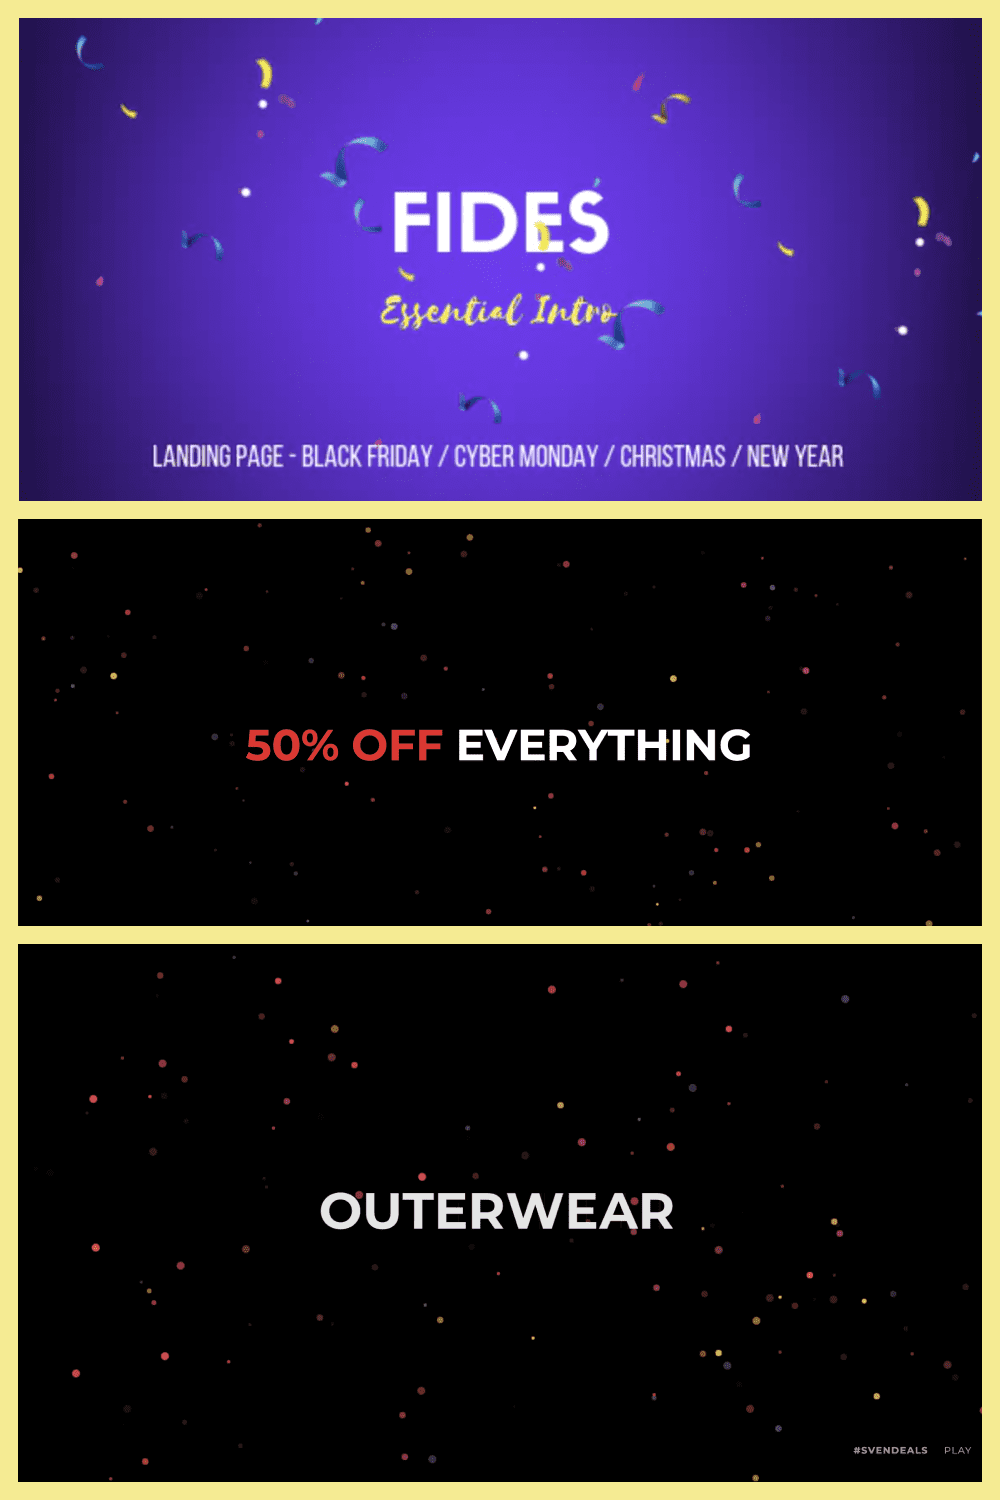 Black Friday landing page with purple background and confetti.